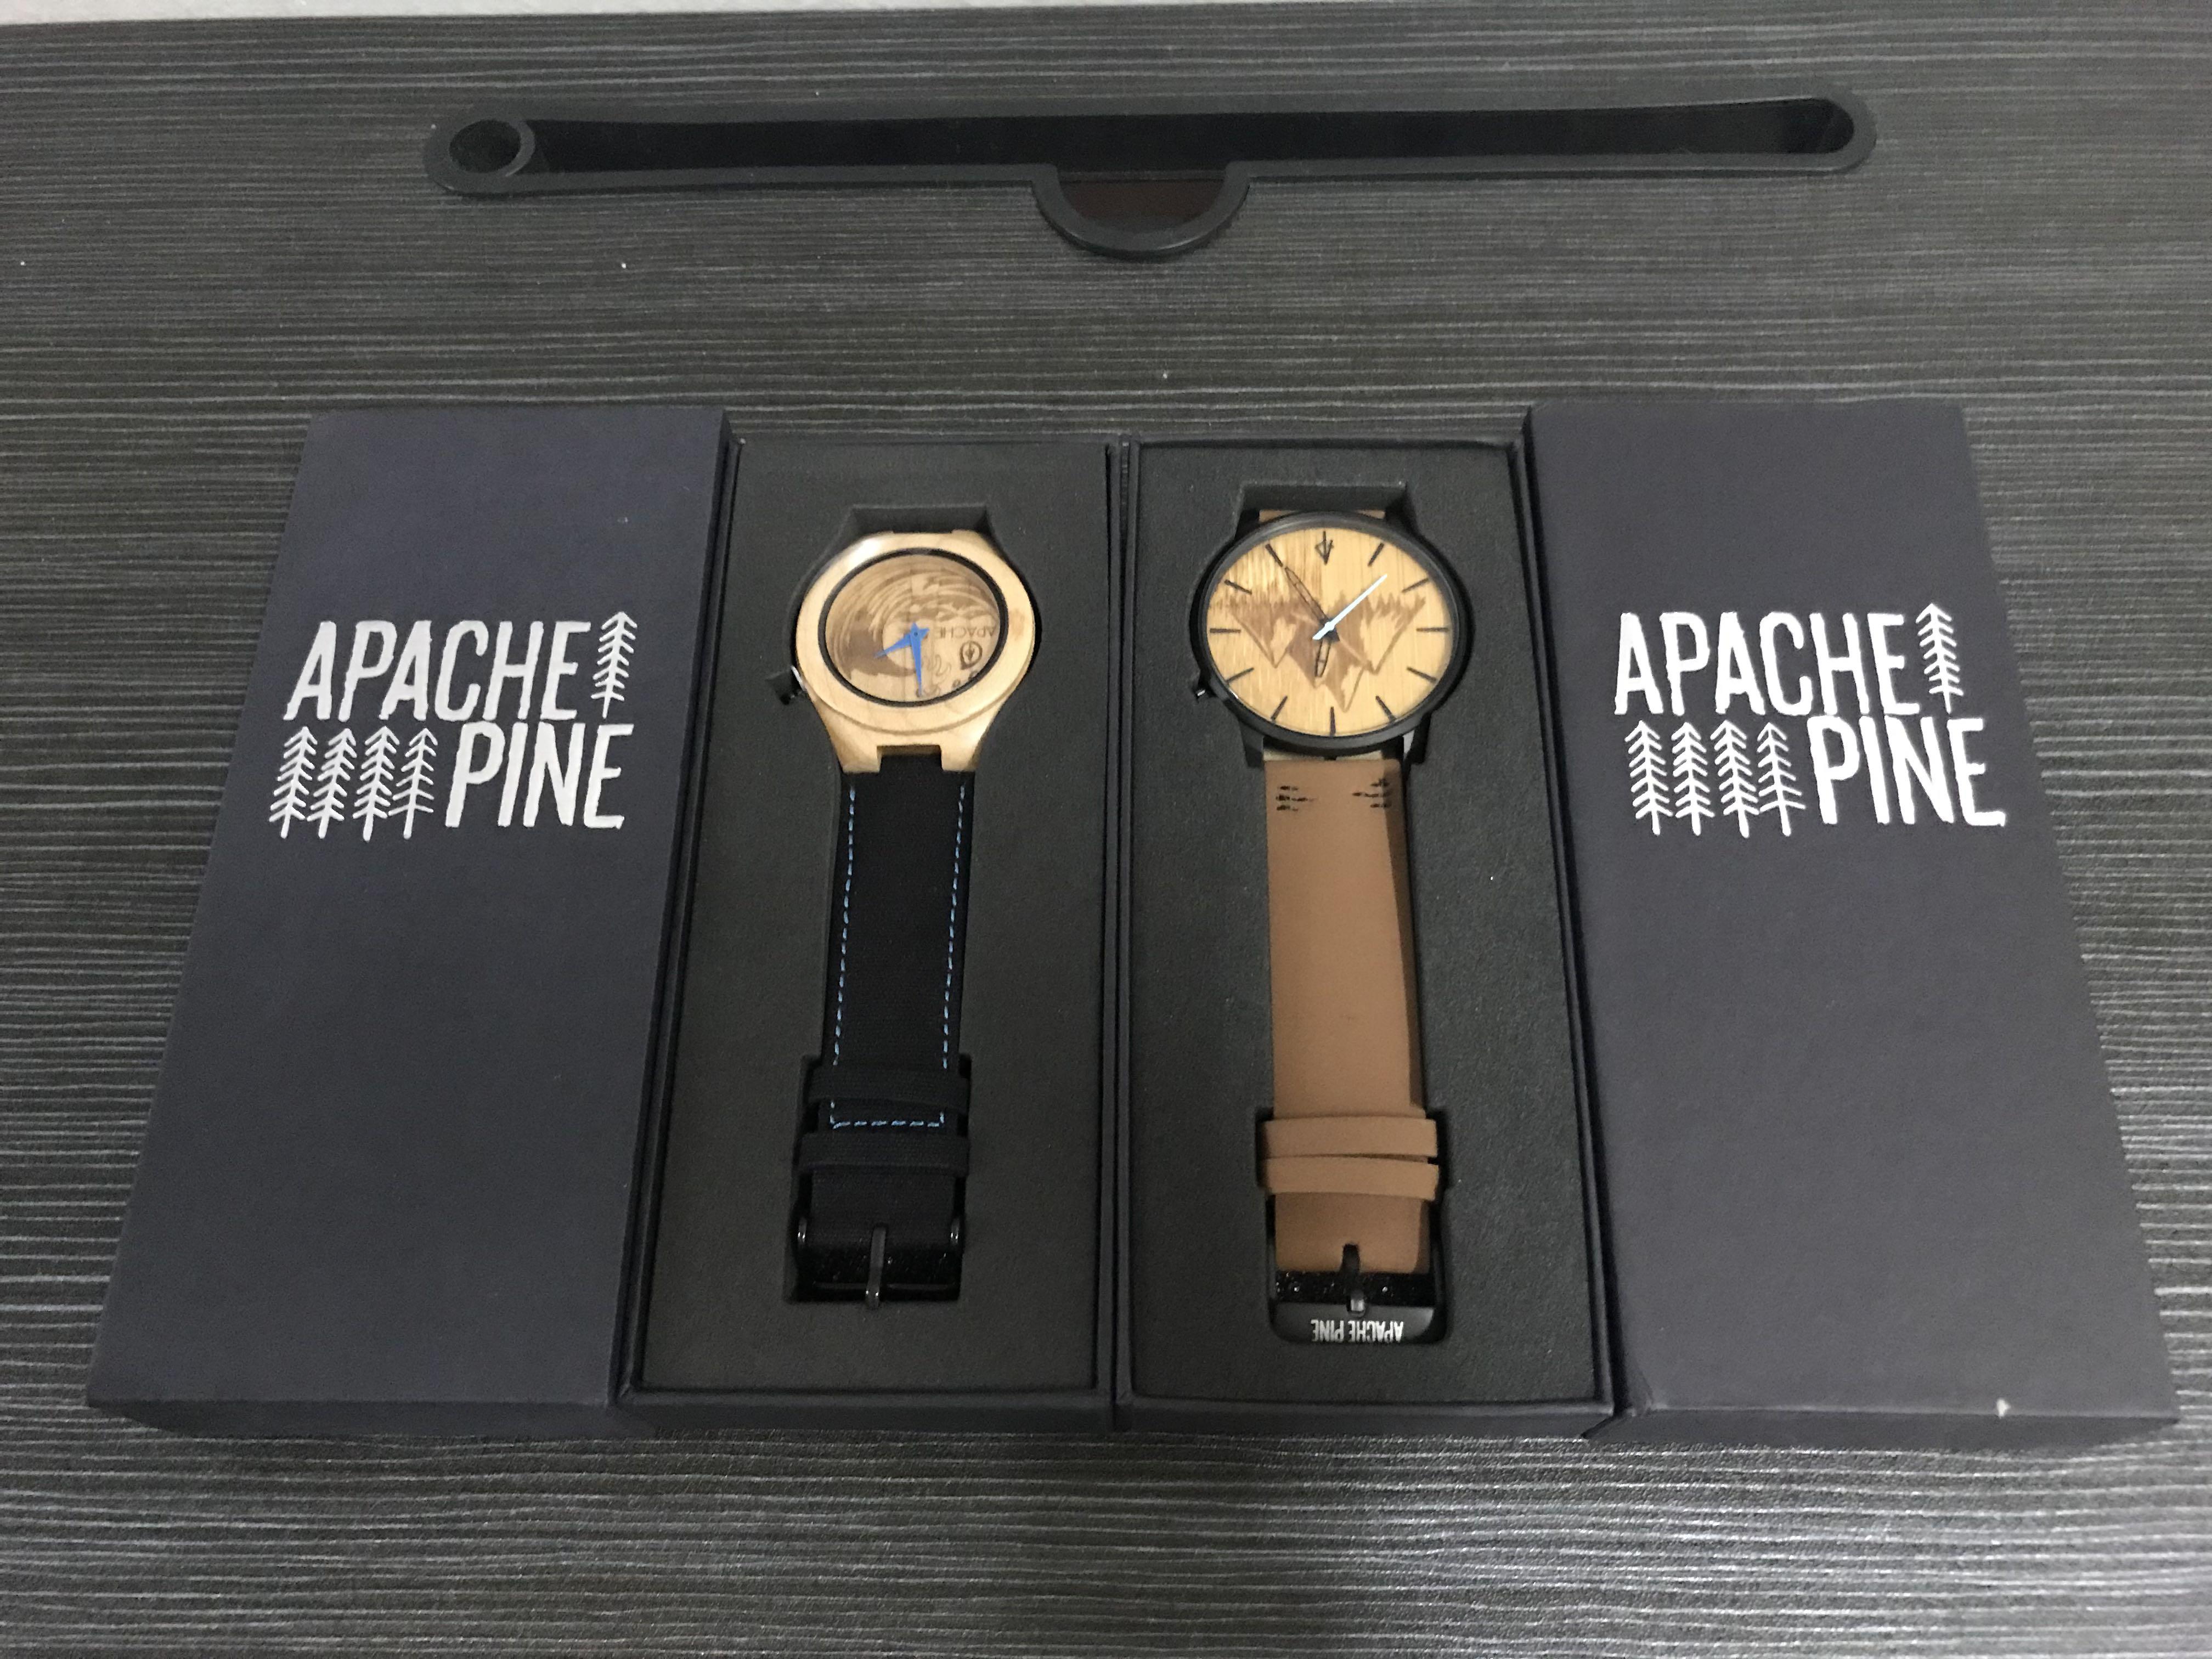 North Edge™ smartwatch Apache 46 smart military tactical watch